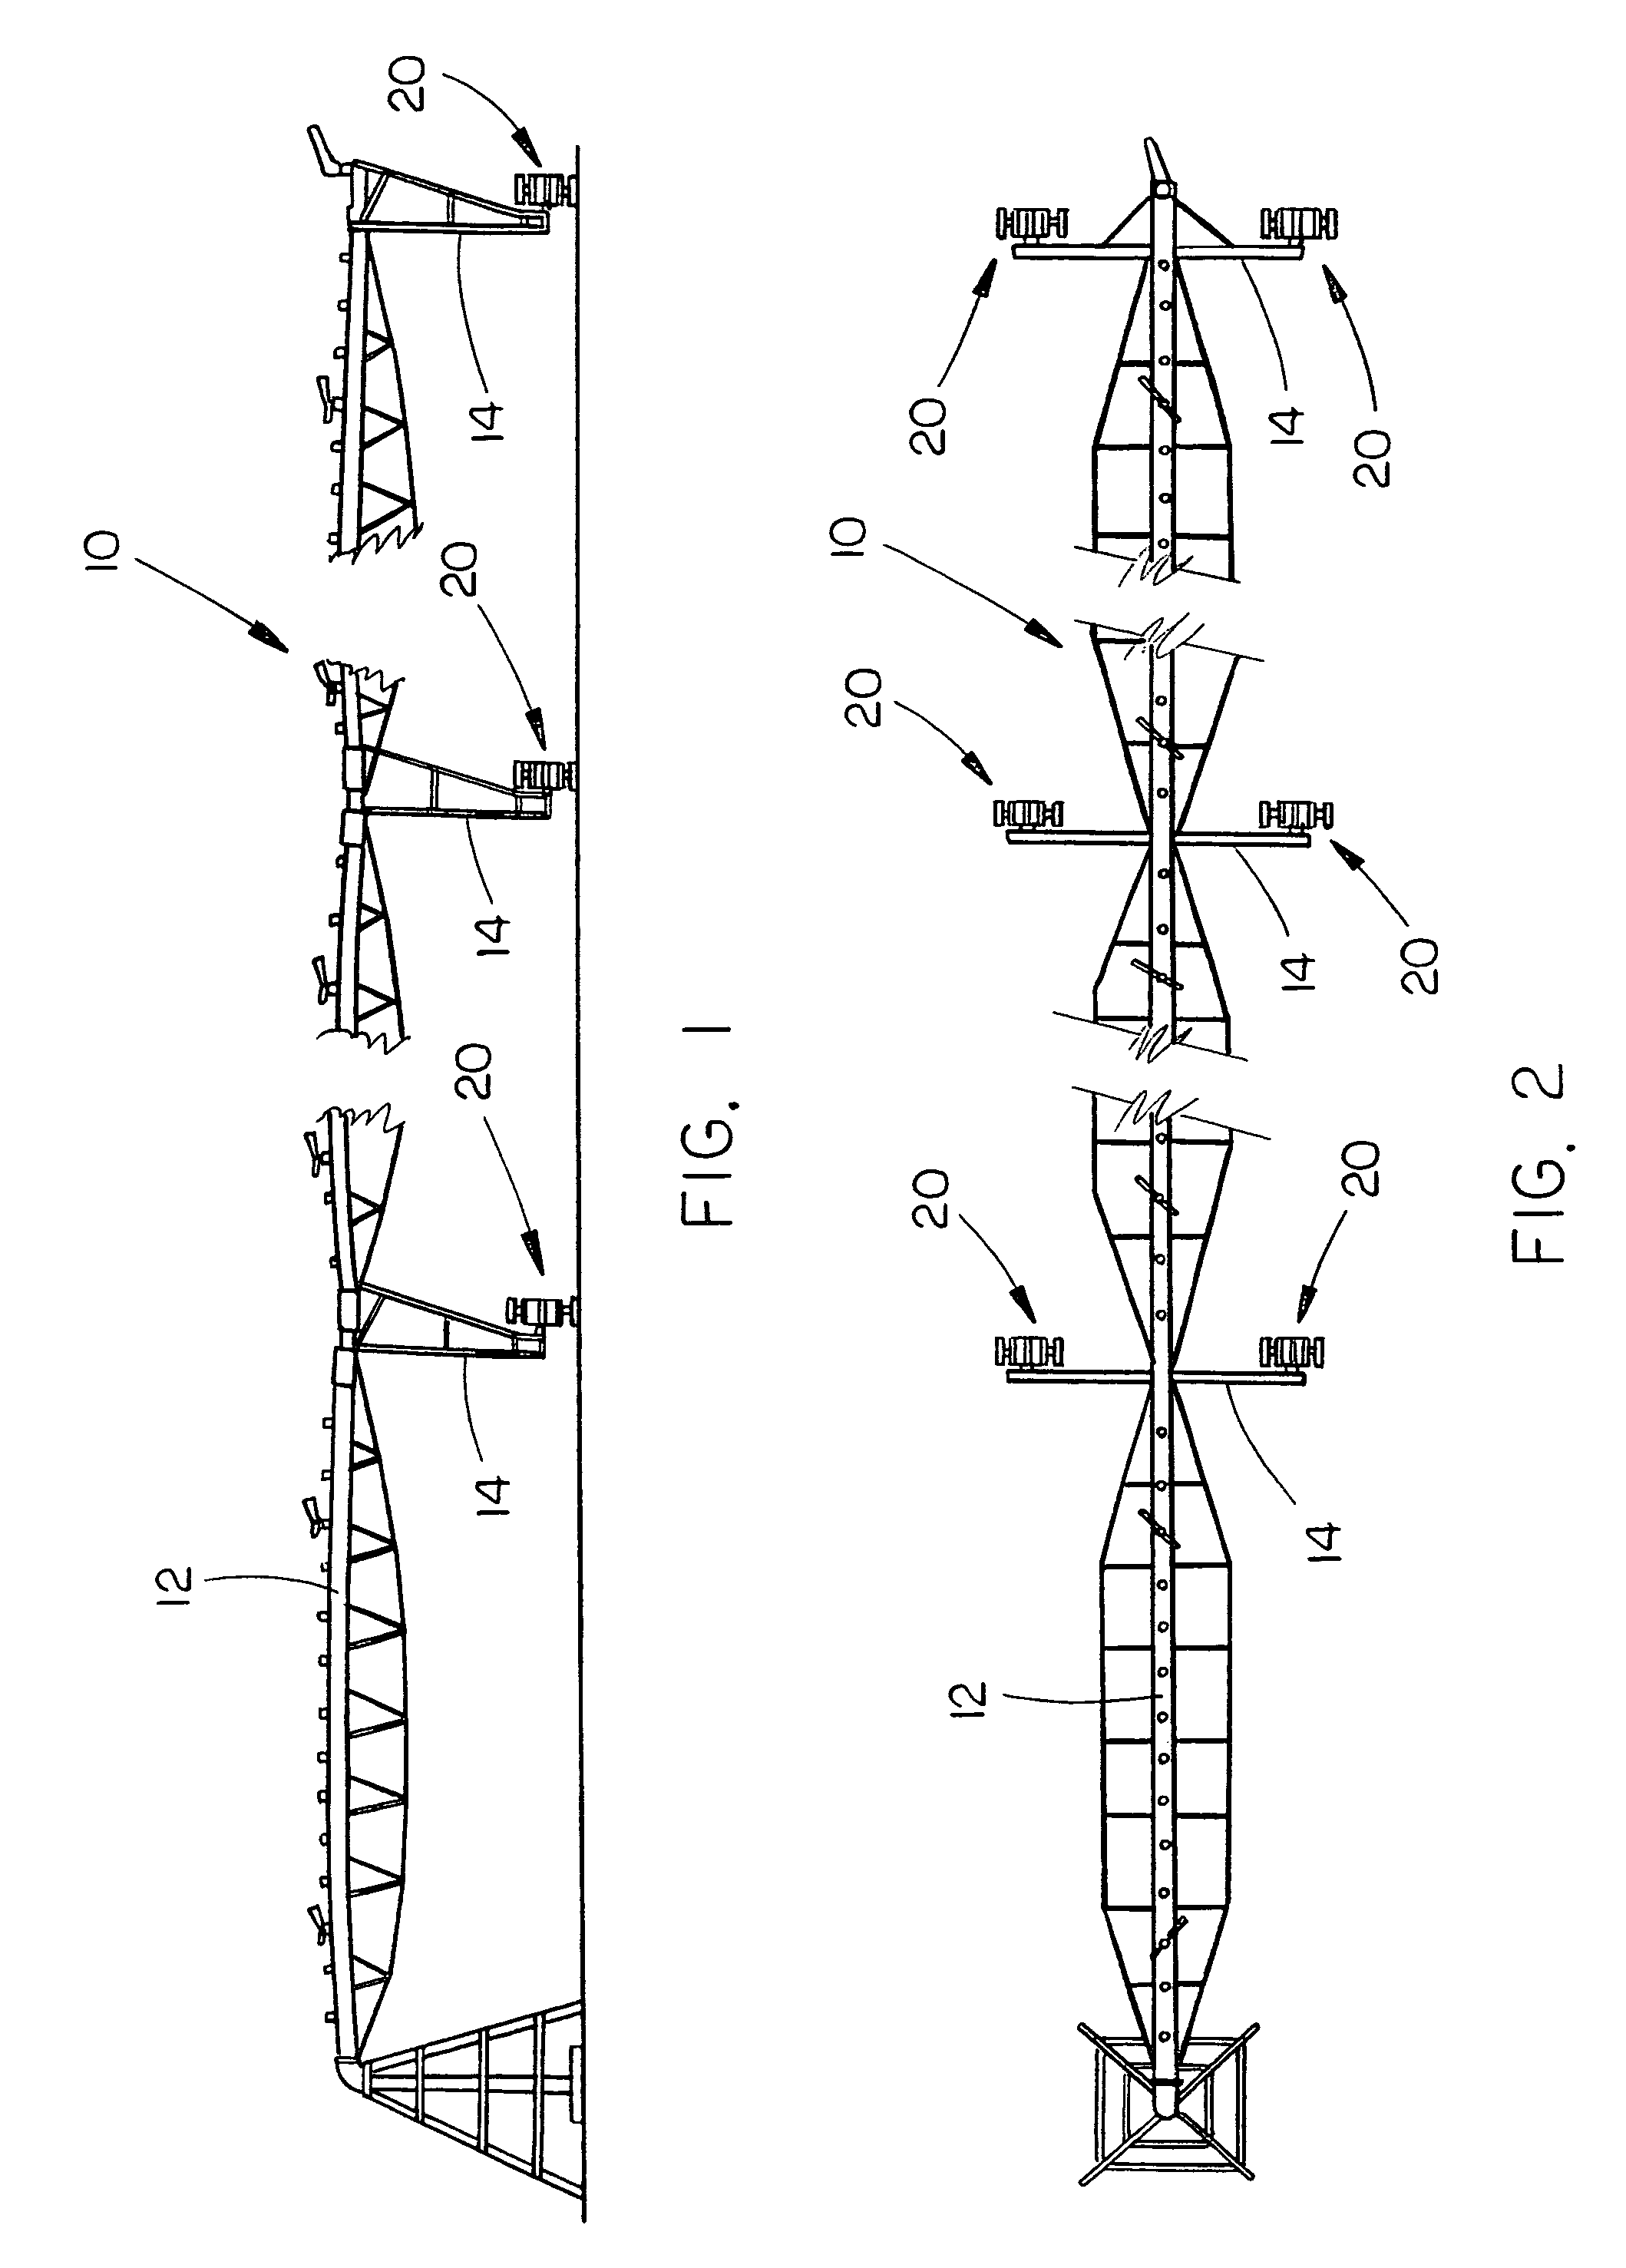 Flotation drive wheel for a self-propelled irrigation system